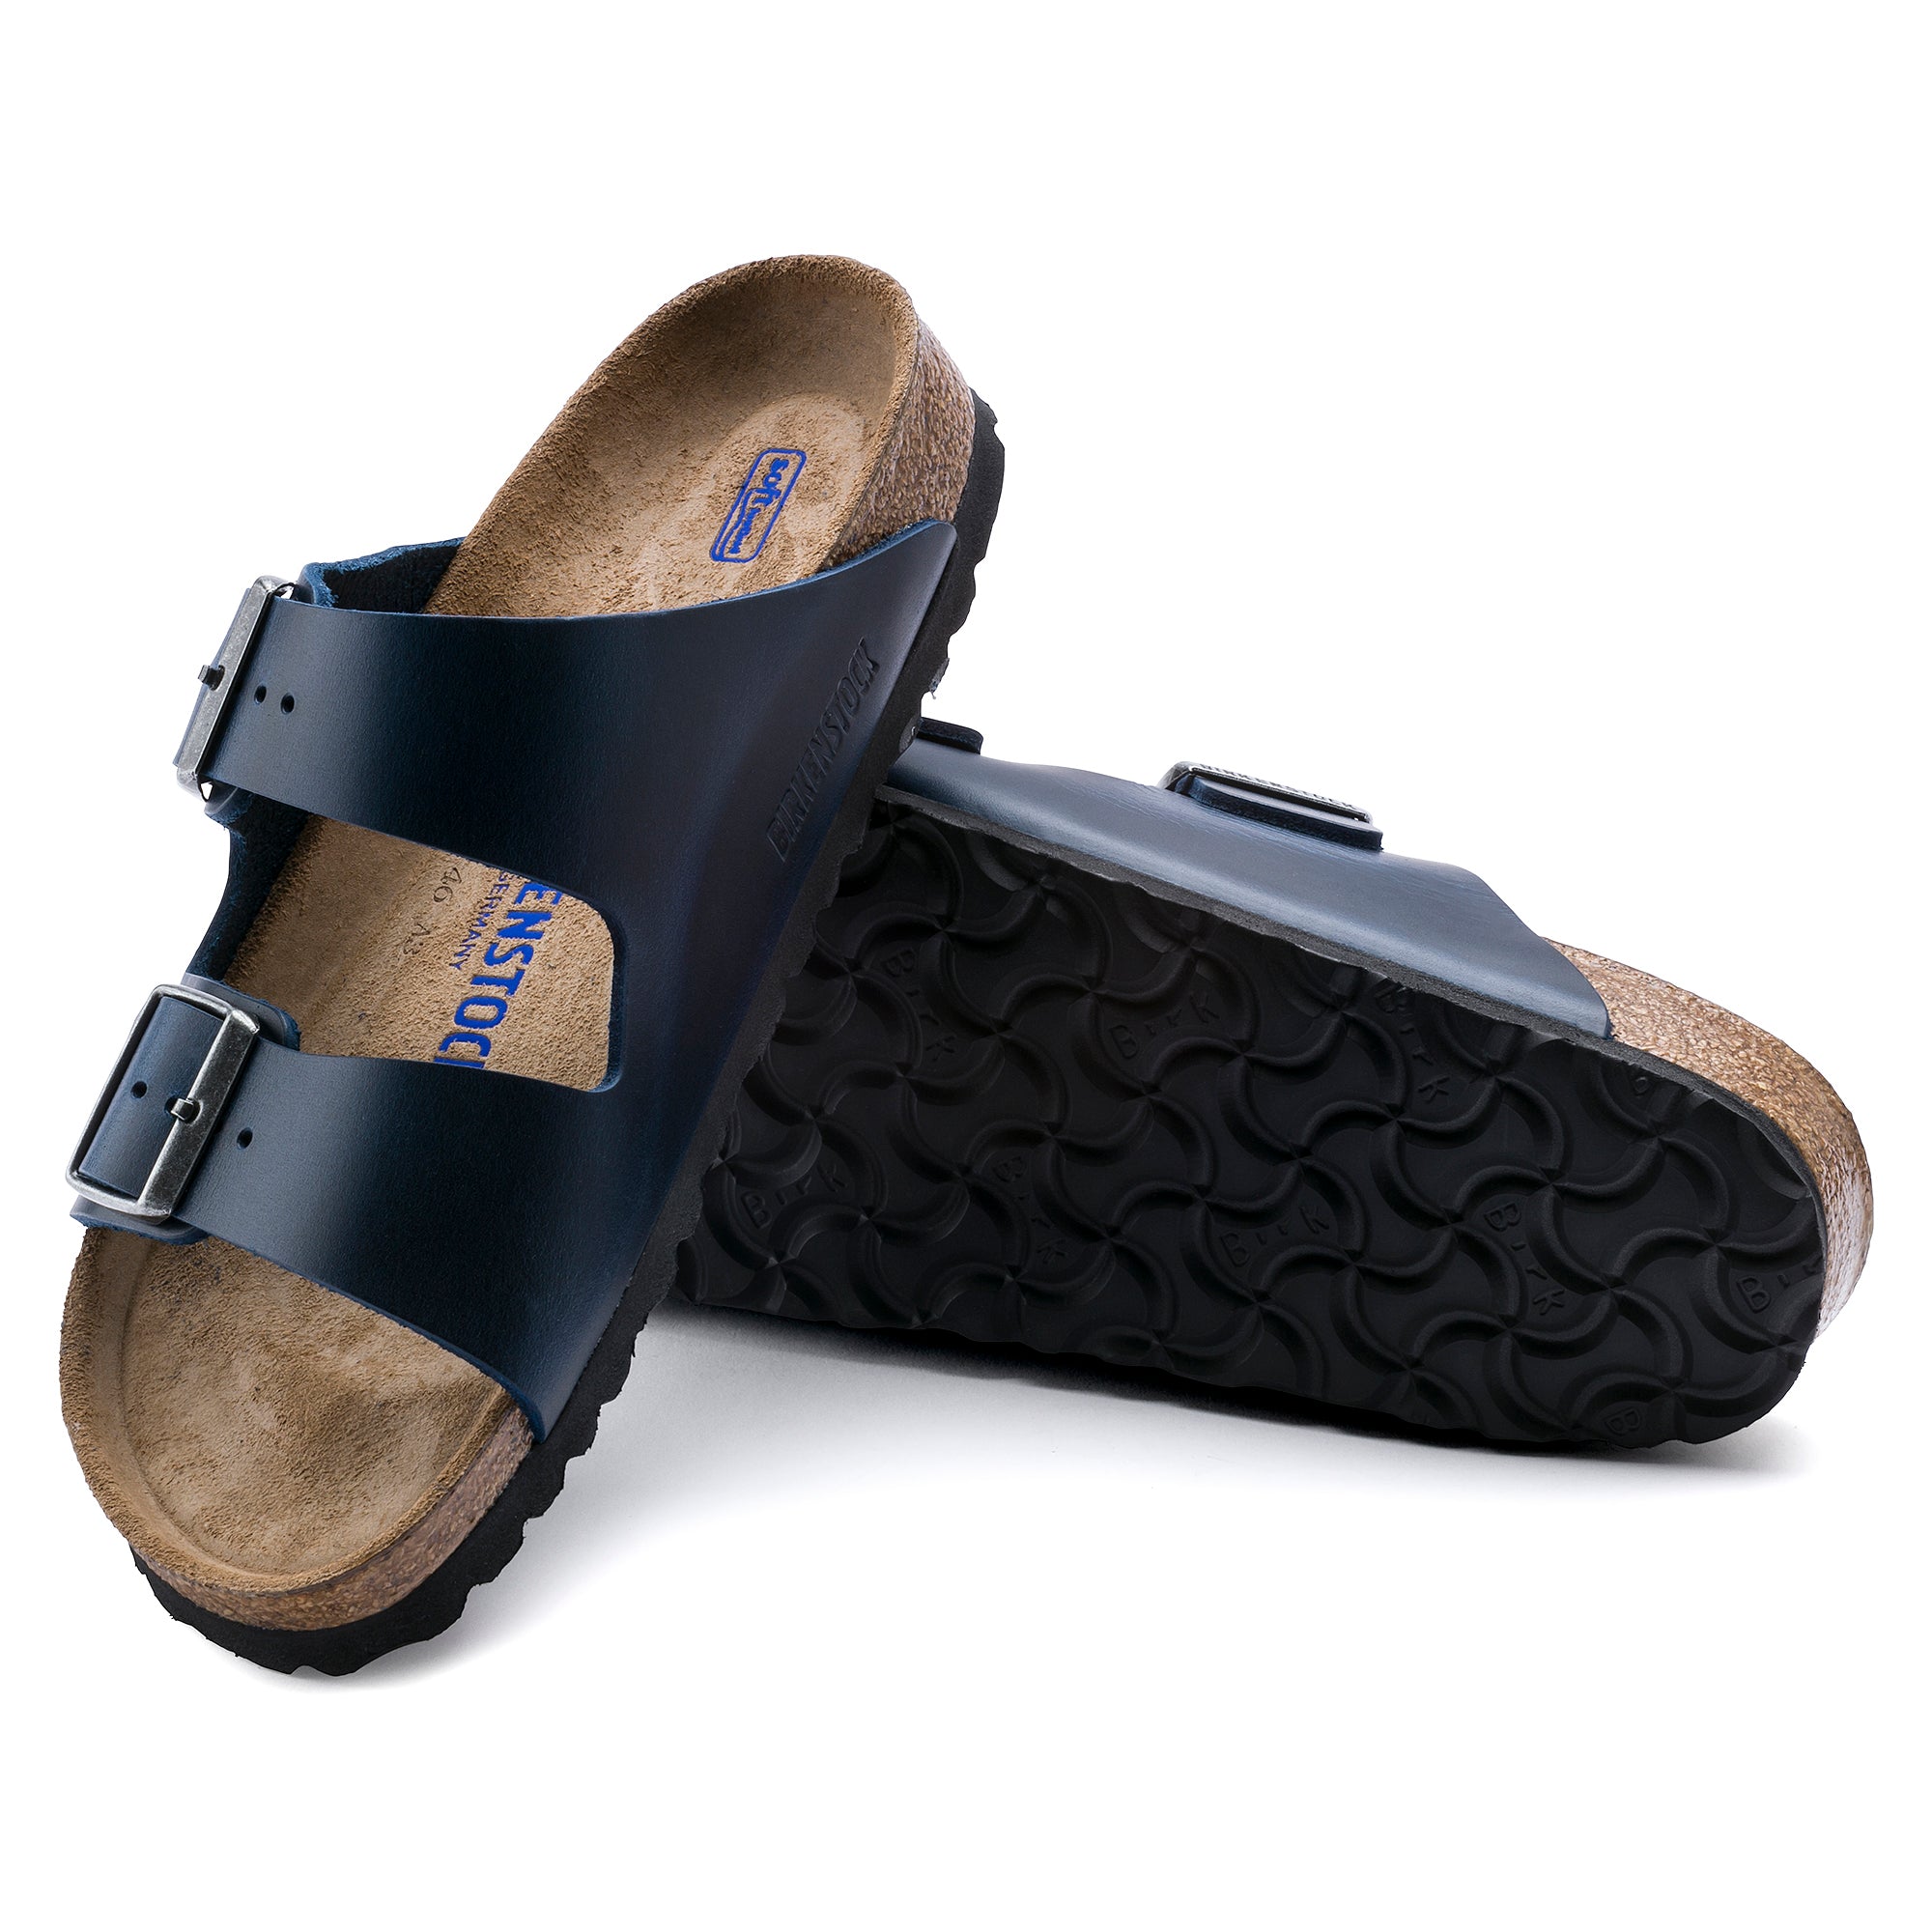 Arizona Oiled Leather in Blue (Soft Footbed)